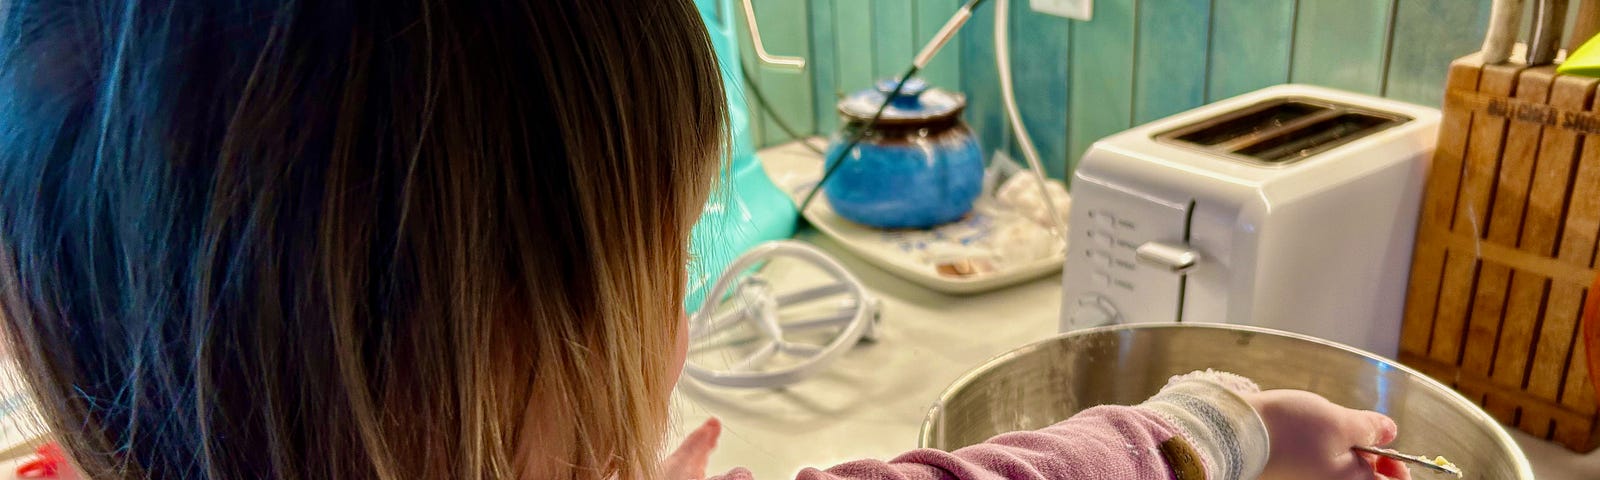 A toddler stands at the counter. She has a mixing bowl in front of her and she is stirring the contents. Her back is to the camera